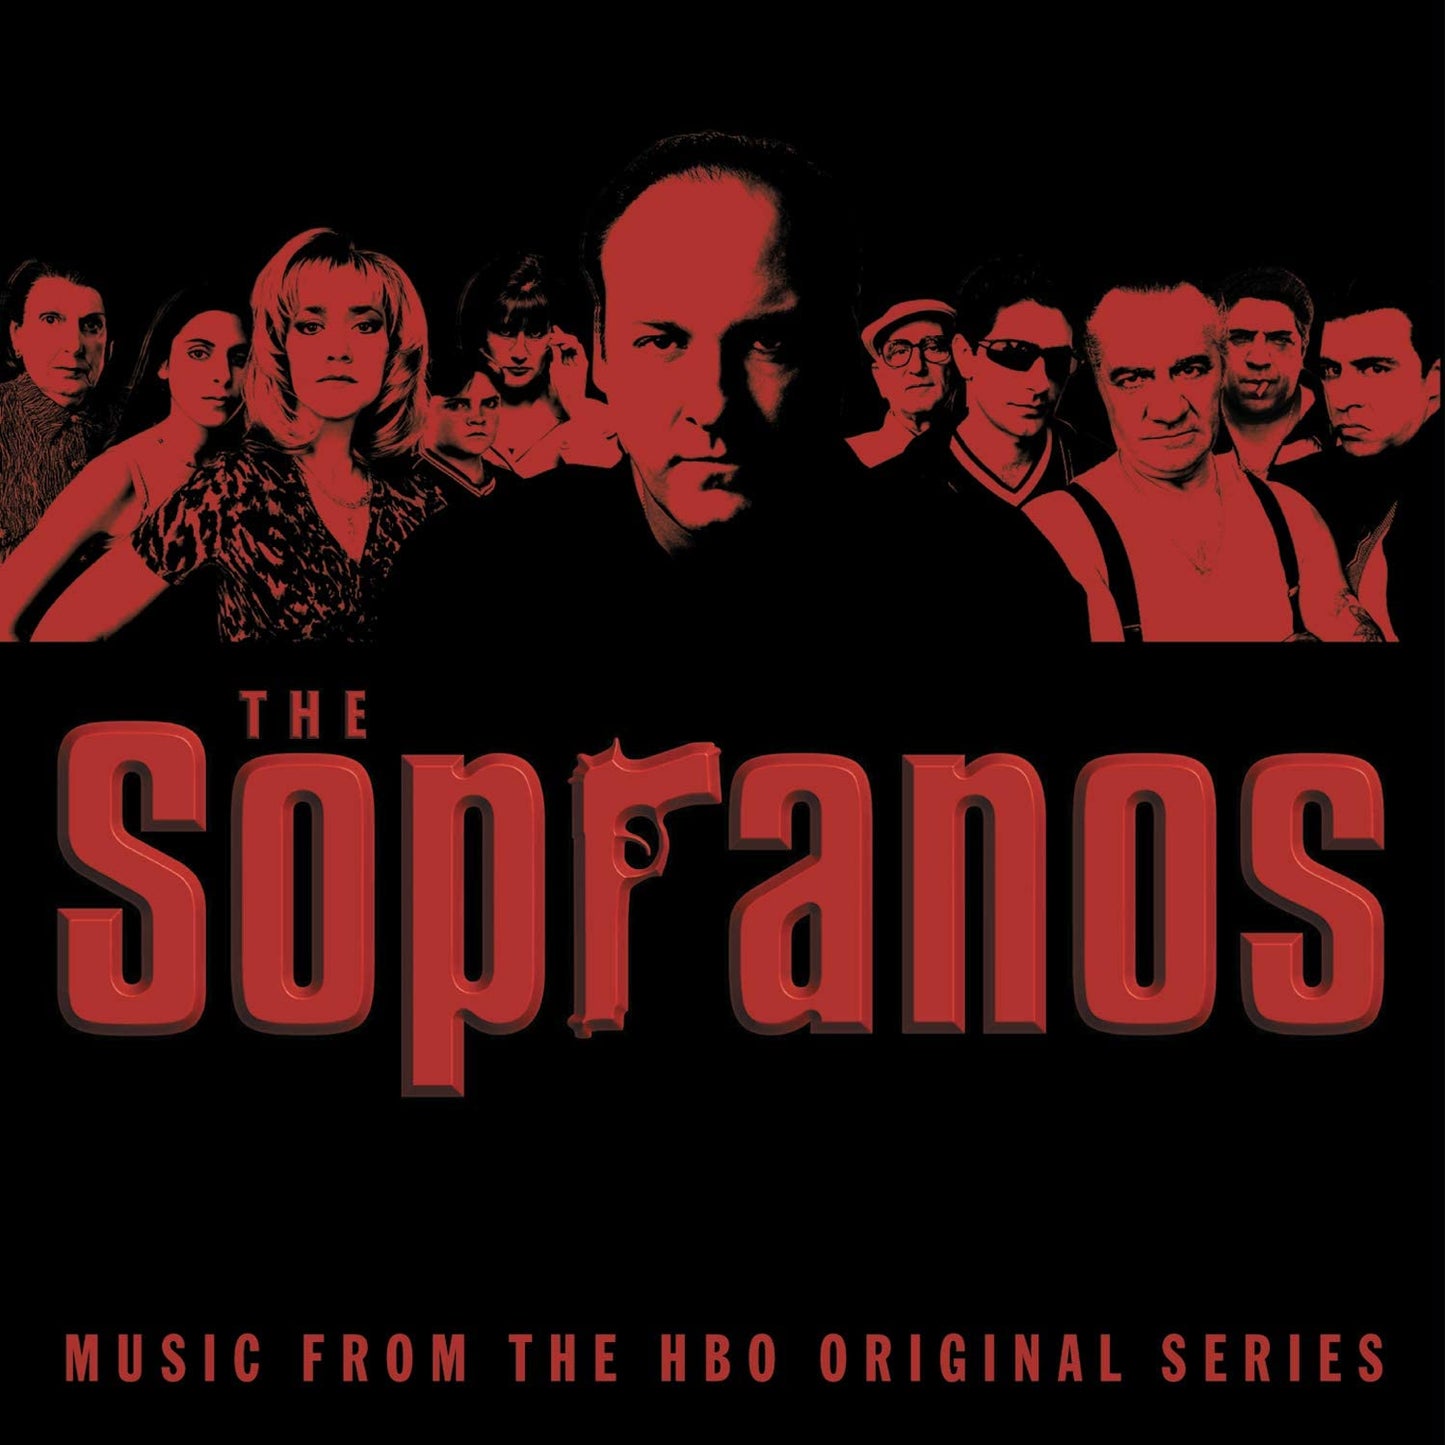 The Sopranos: Music from the HBO Original Series - USED CD